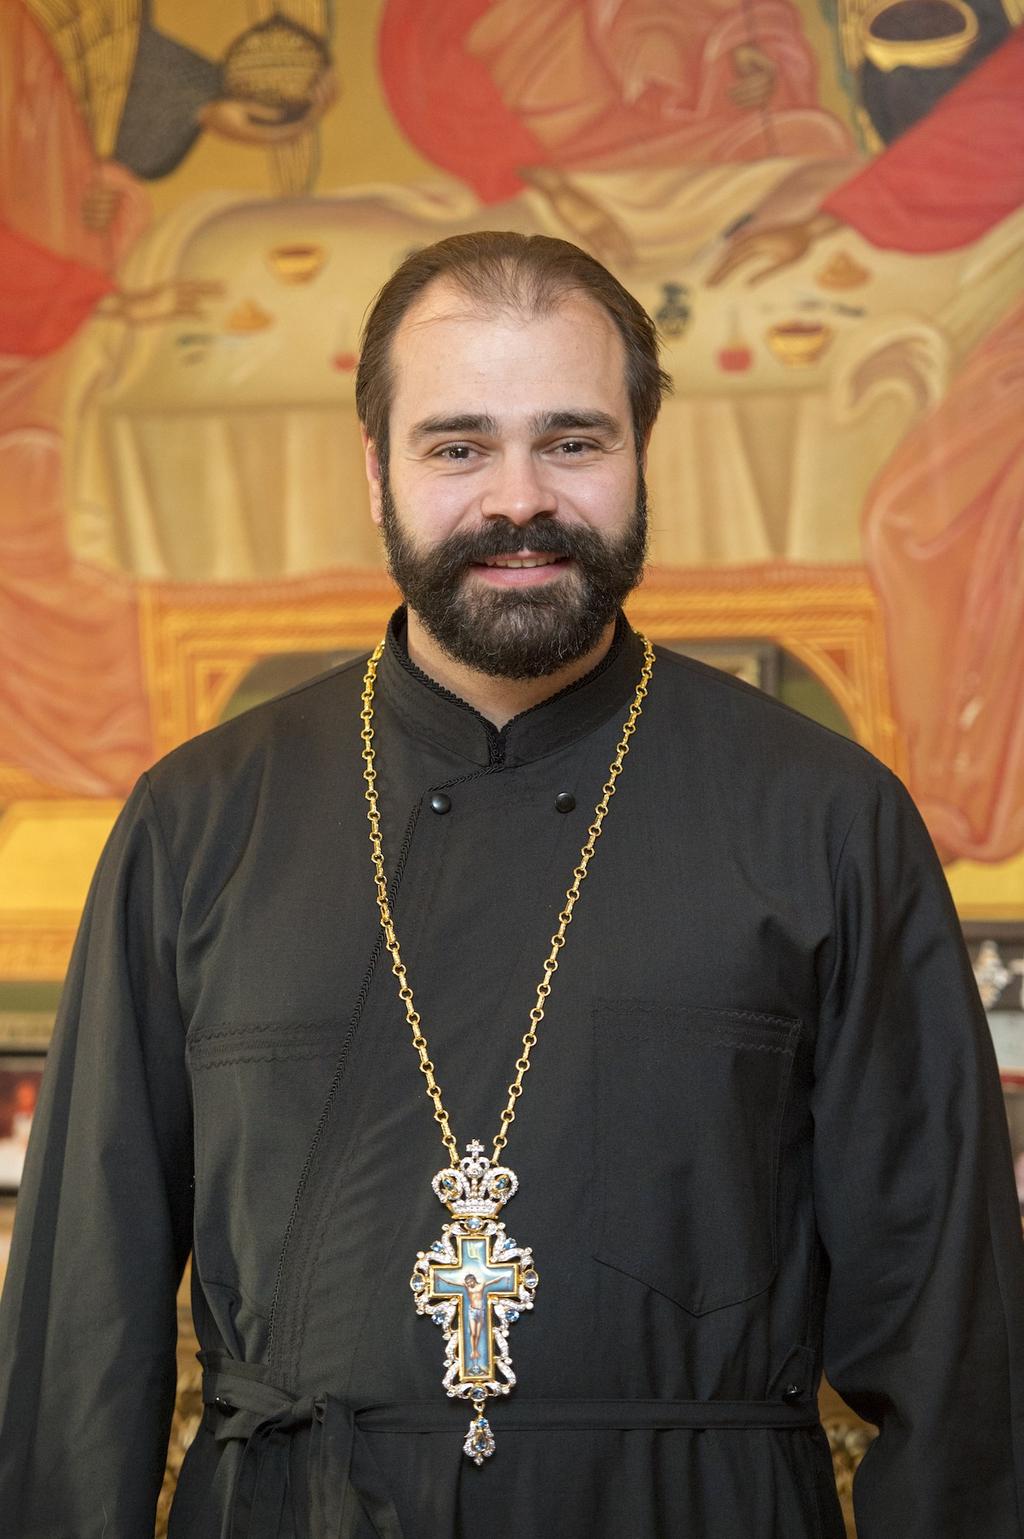 Metropolitan-Elect Nathanael Will Be Enthroned on March 24 as Metropolitan of Chicago Metropolitan-elect Nathanael was born in Thessaloniki, Greece (1978).